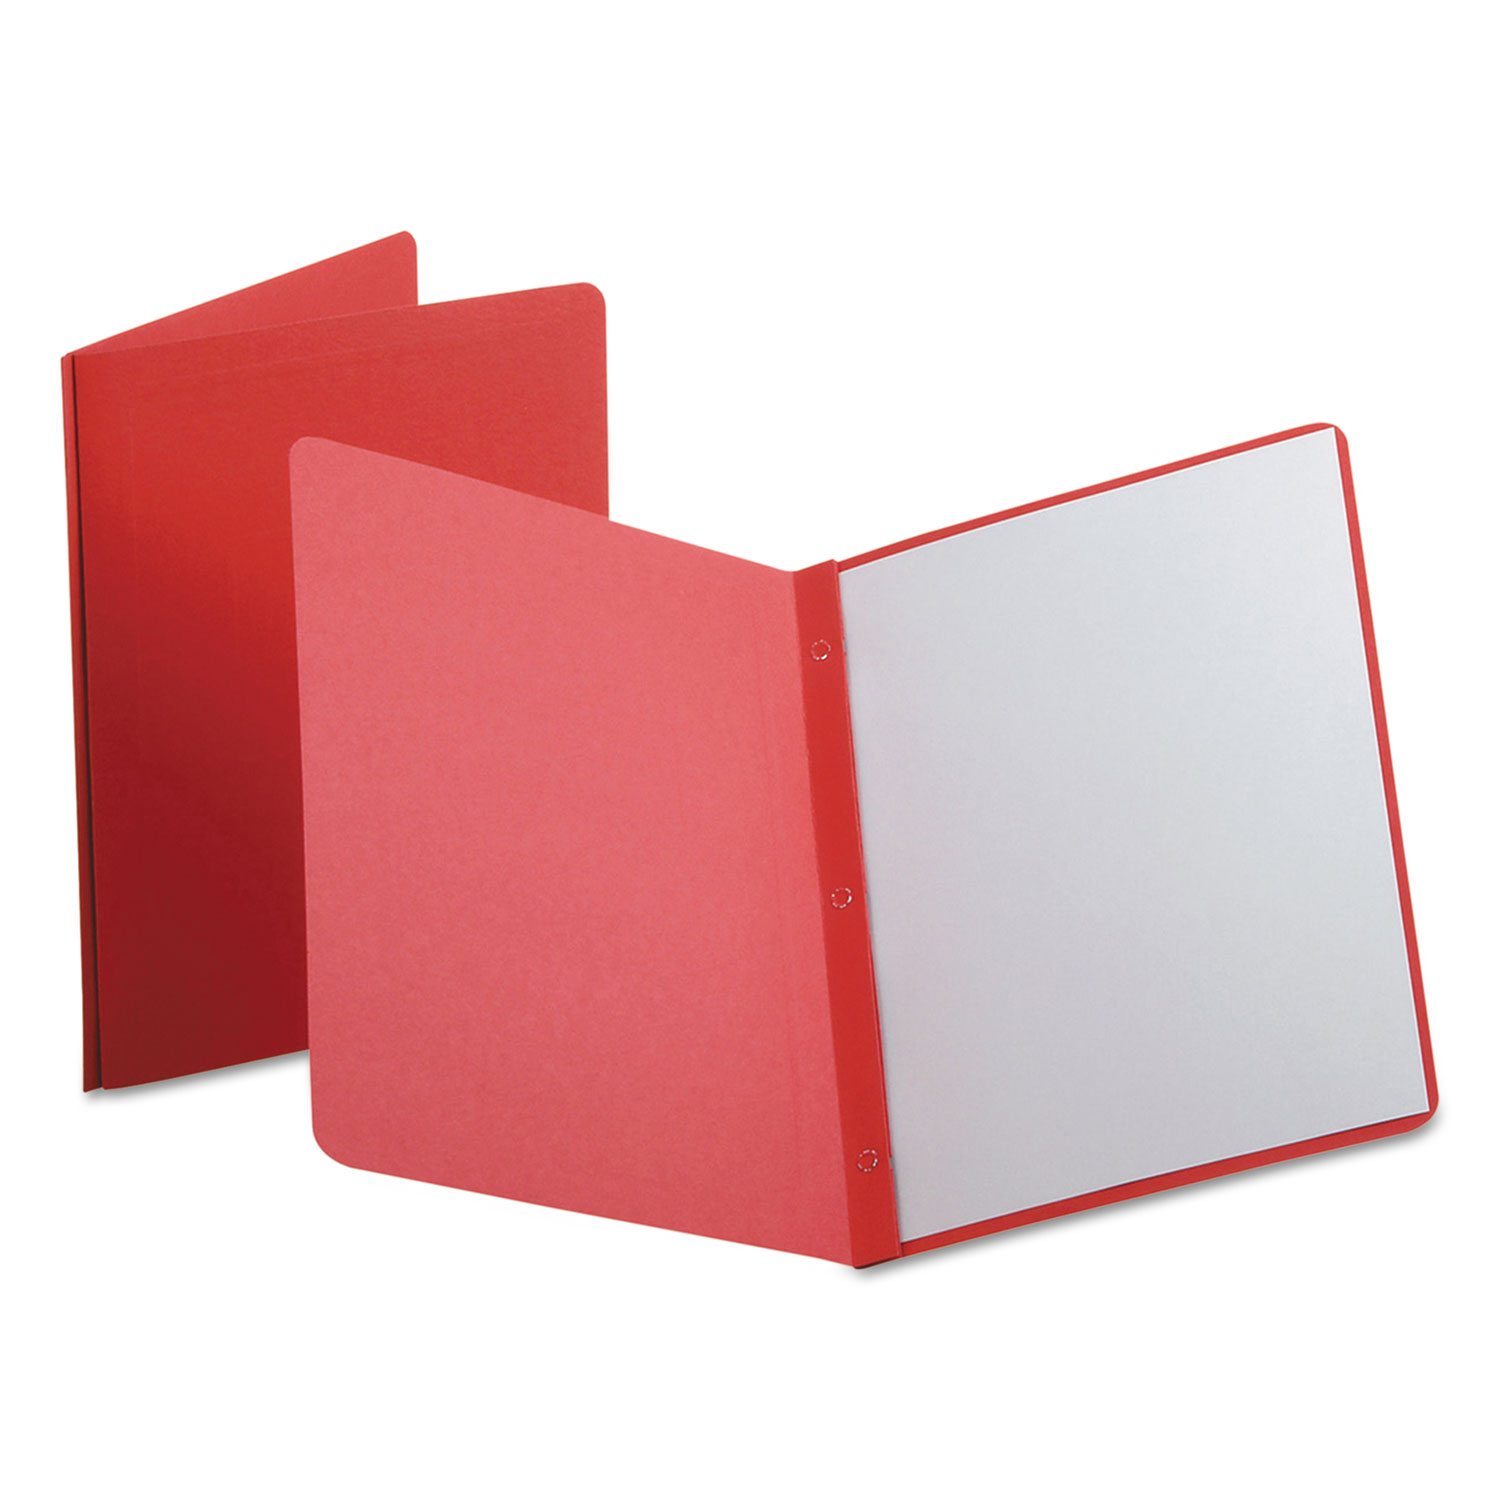  Oxford 52511 Report Cover, 3 Fasteners, Panel and Border Cover, Letter, Red, 25/Box (OXF52511) 